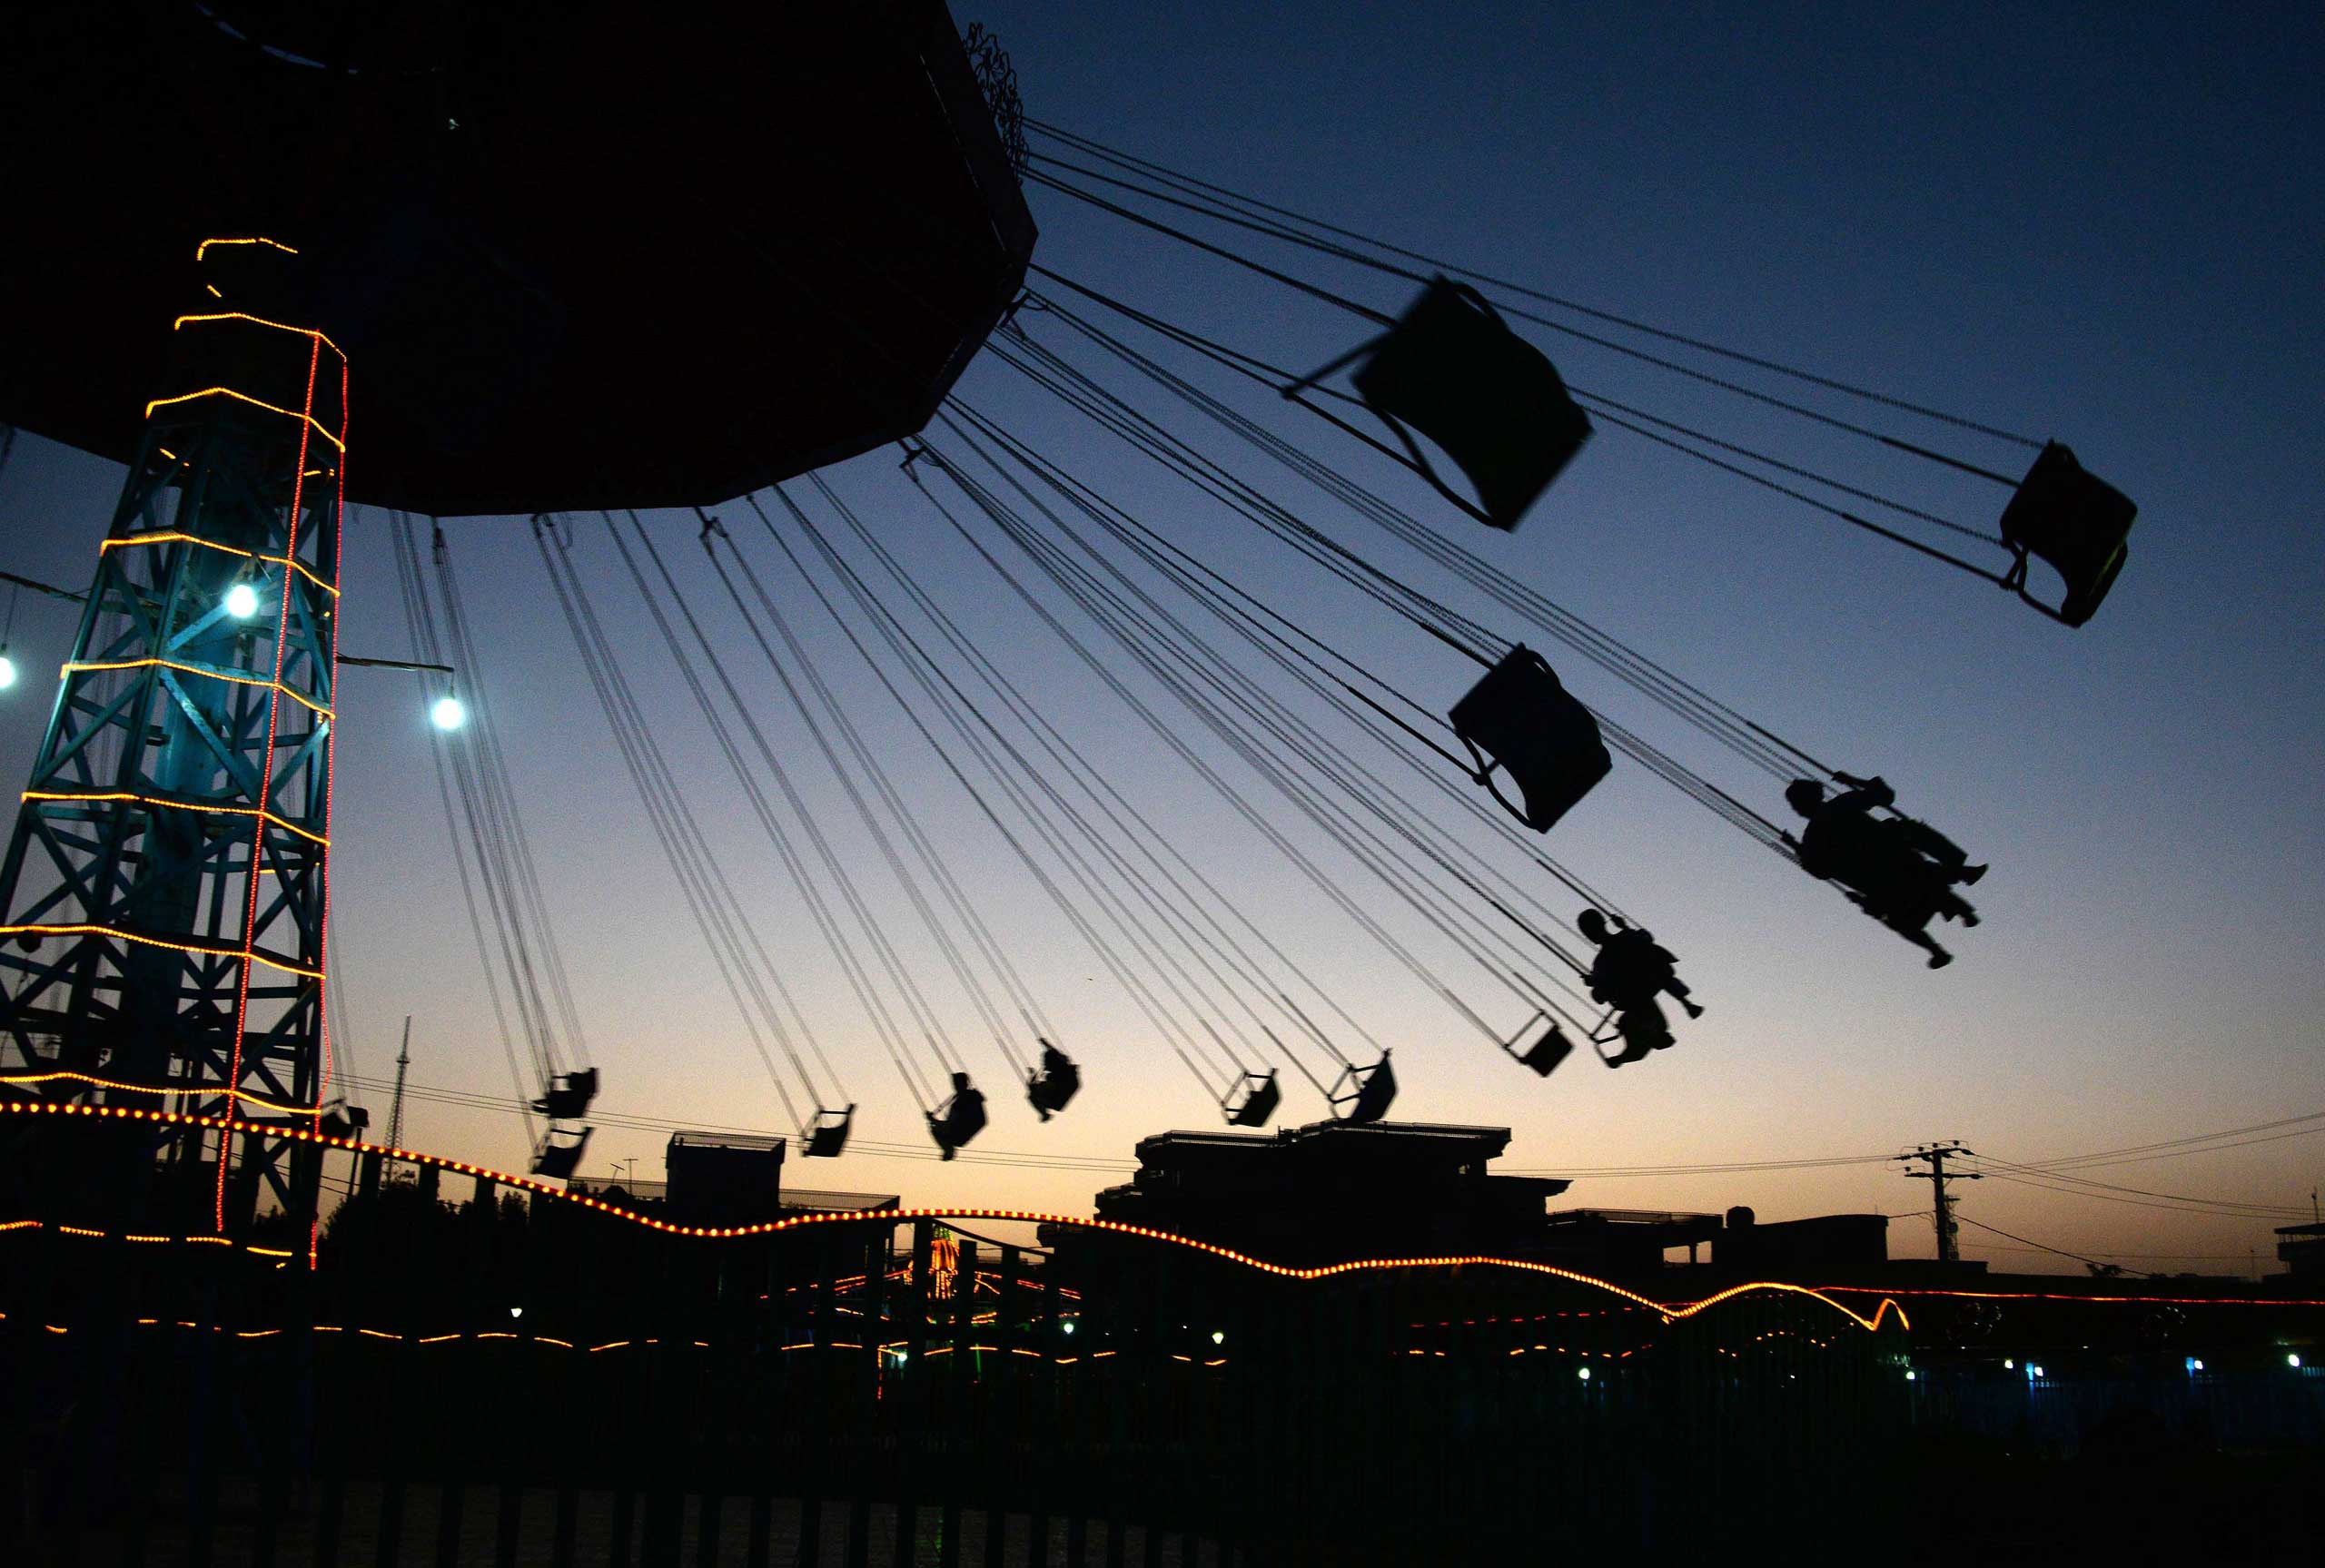 Afghan youth enjoy a ride on the swings at a park in Mazar-i- Sharif on Sept. 12, 2014.